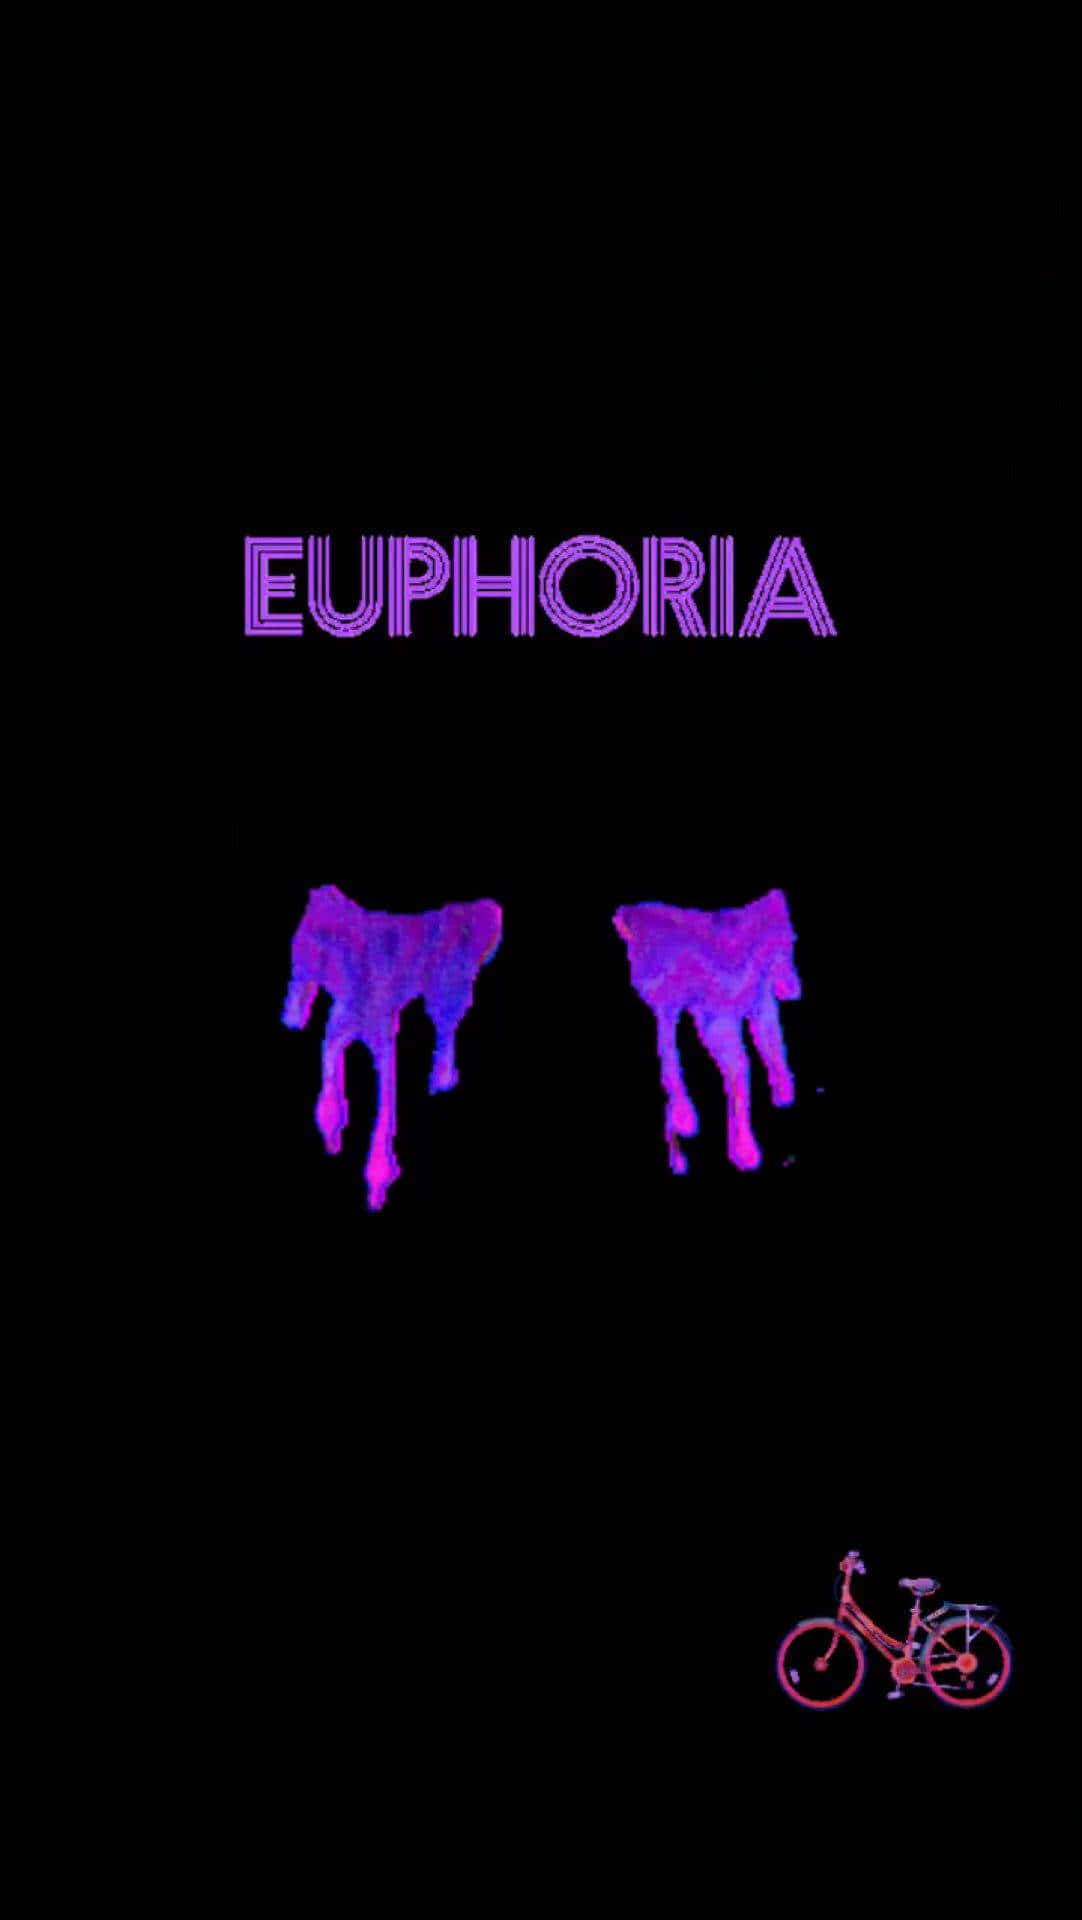 Watch the exciting portrayal of modern teenage life in the upcoming season of HBO’s hit show ‘Euphoria’. Wallpaper